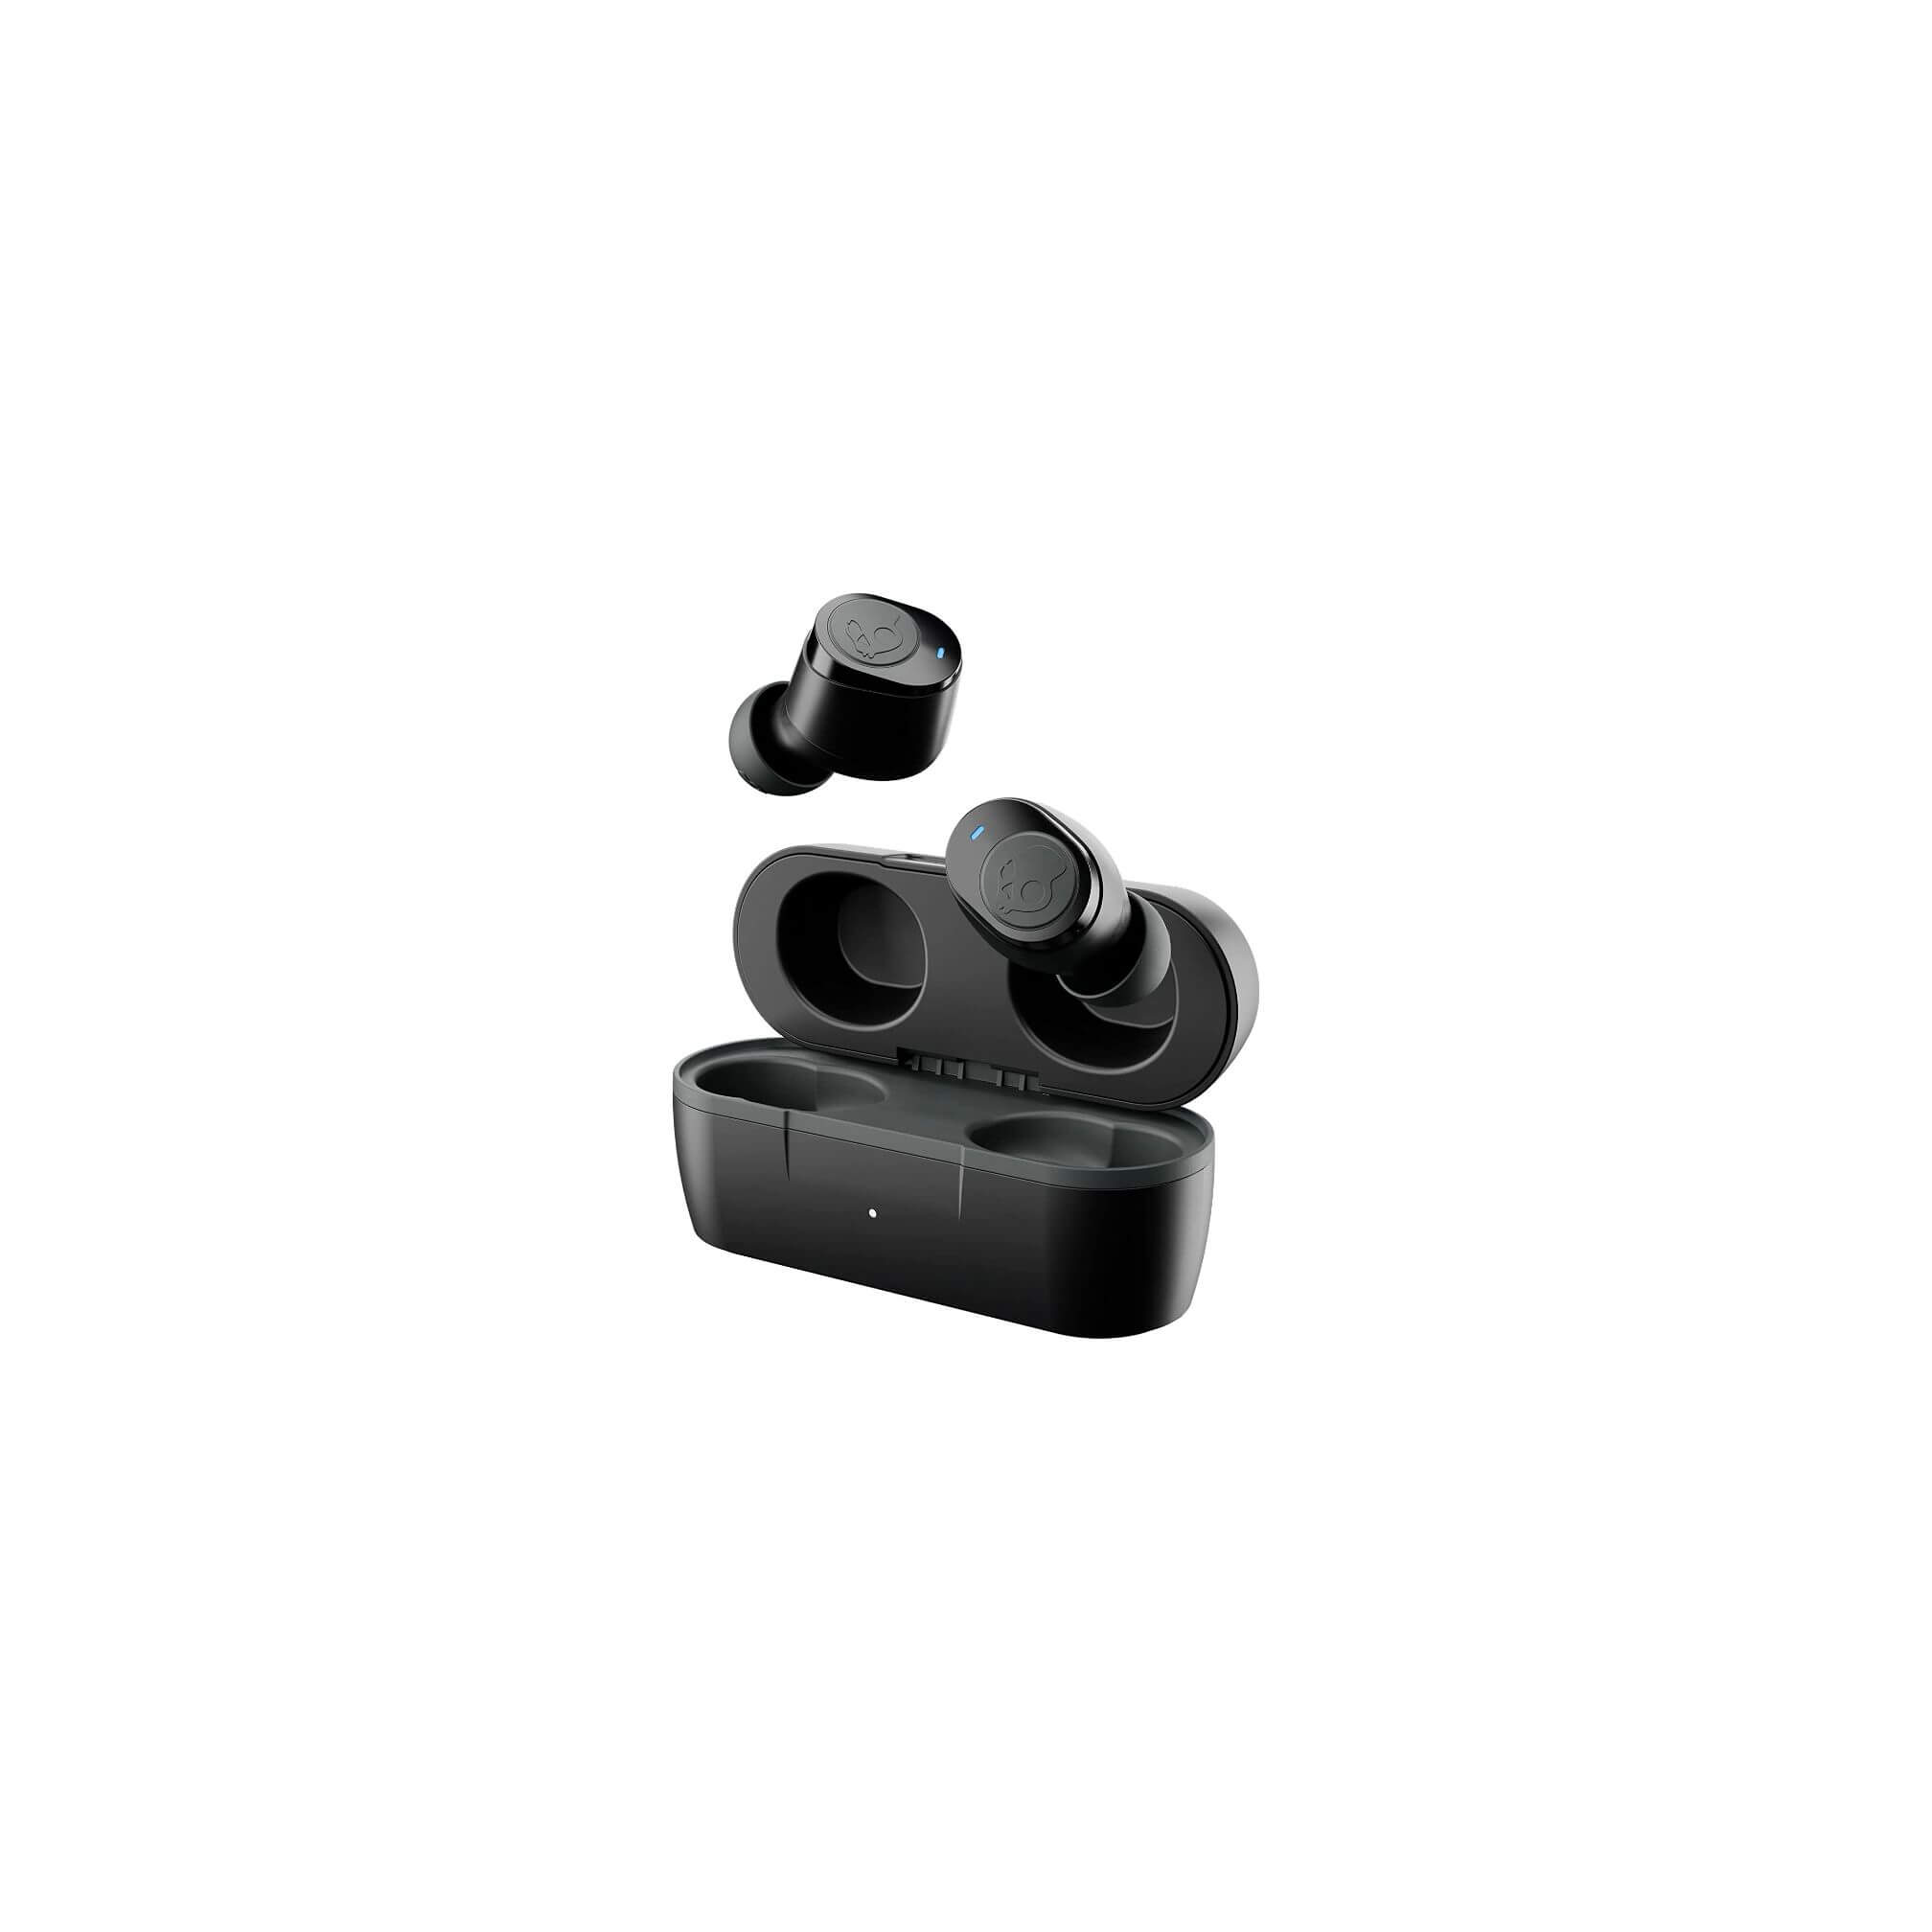 Quick Guide To Pairing Jib Wireless Earbuds